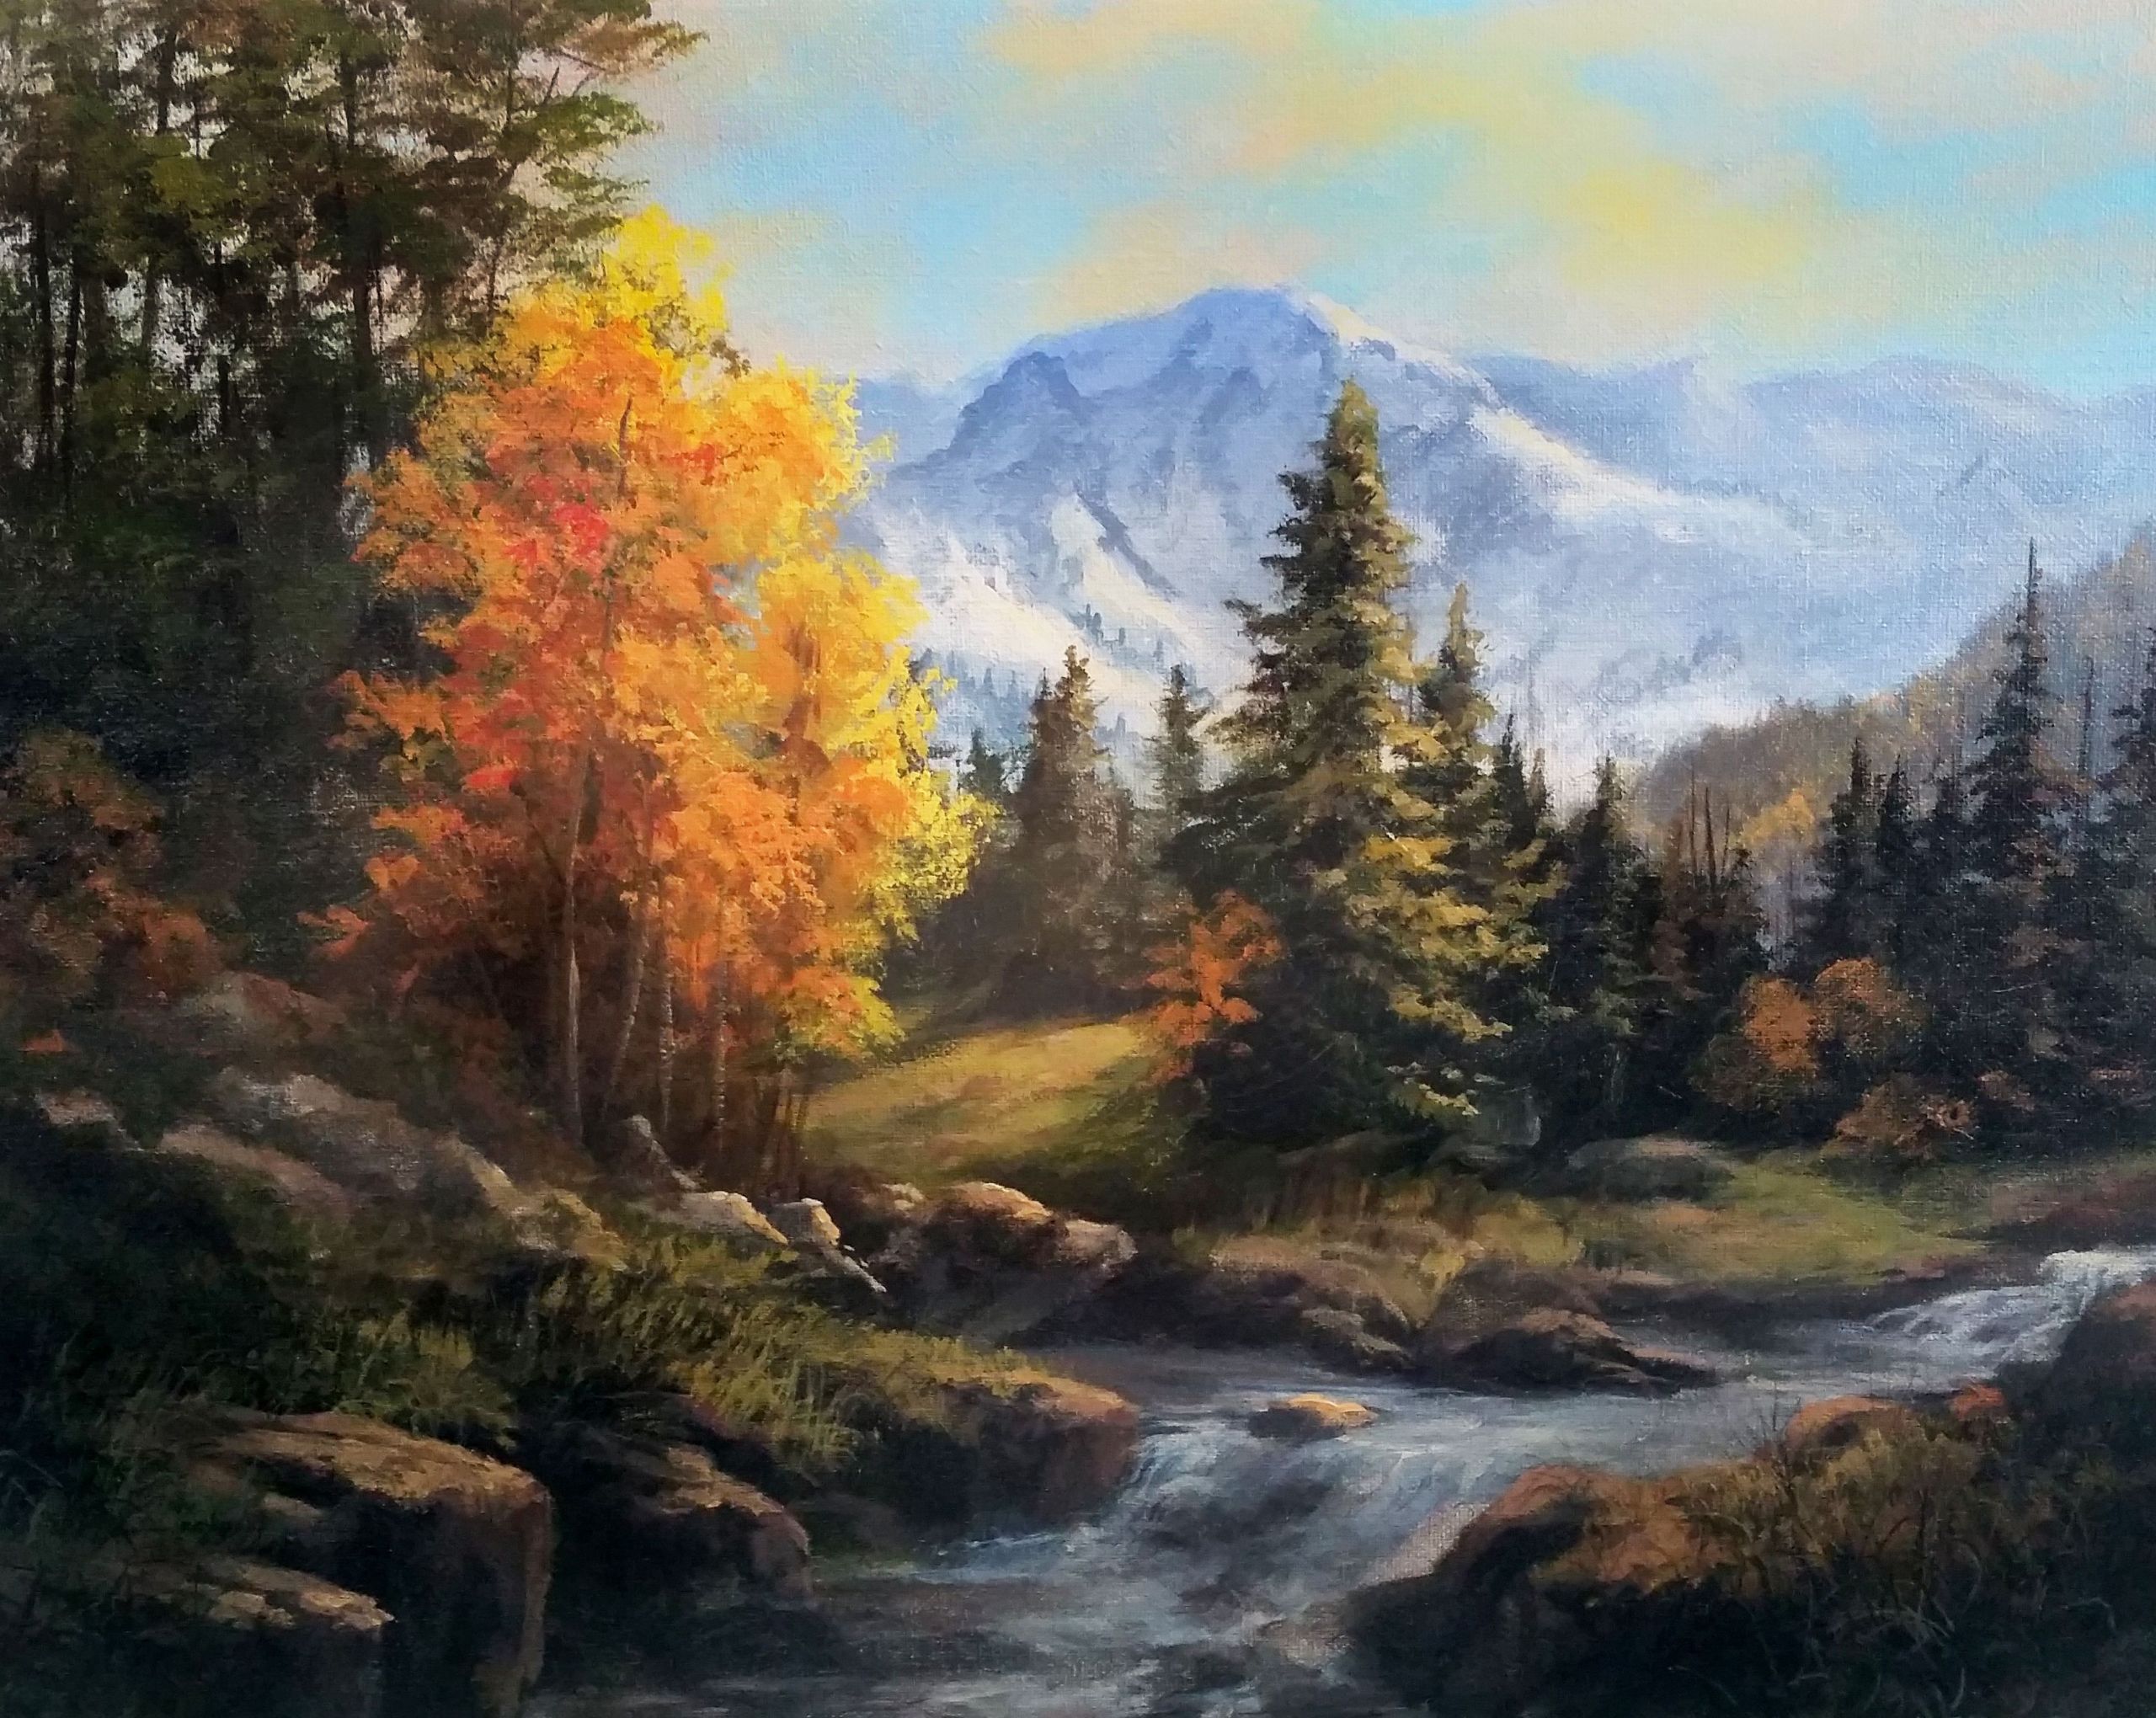 Acrylic Paint Landscape
 "Acrylic Landscape" Acrylic Painting by Kevin Hill Watch